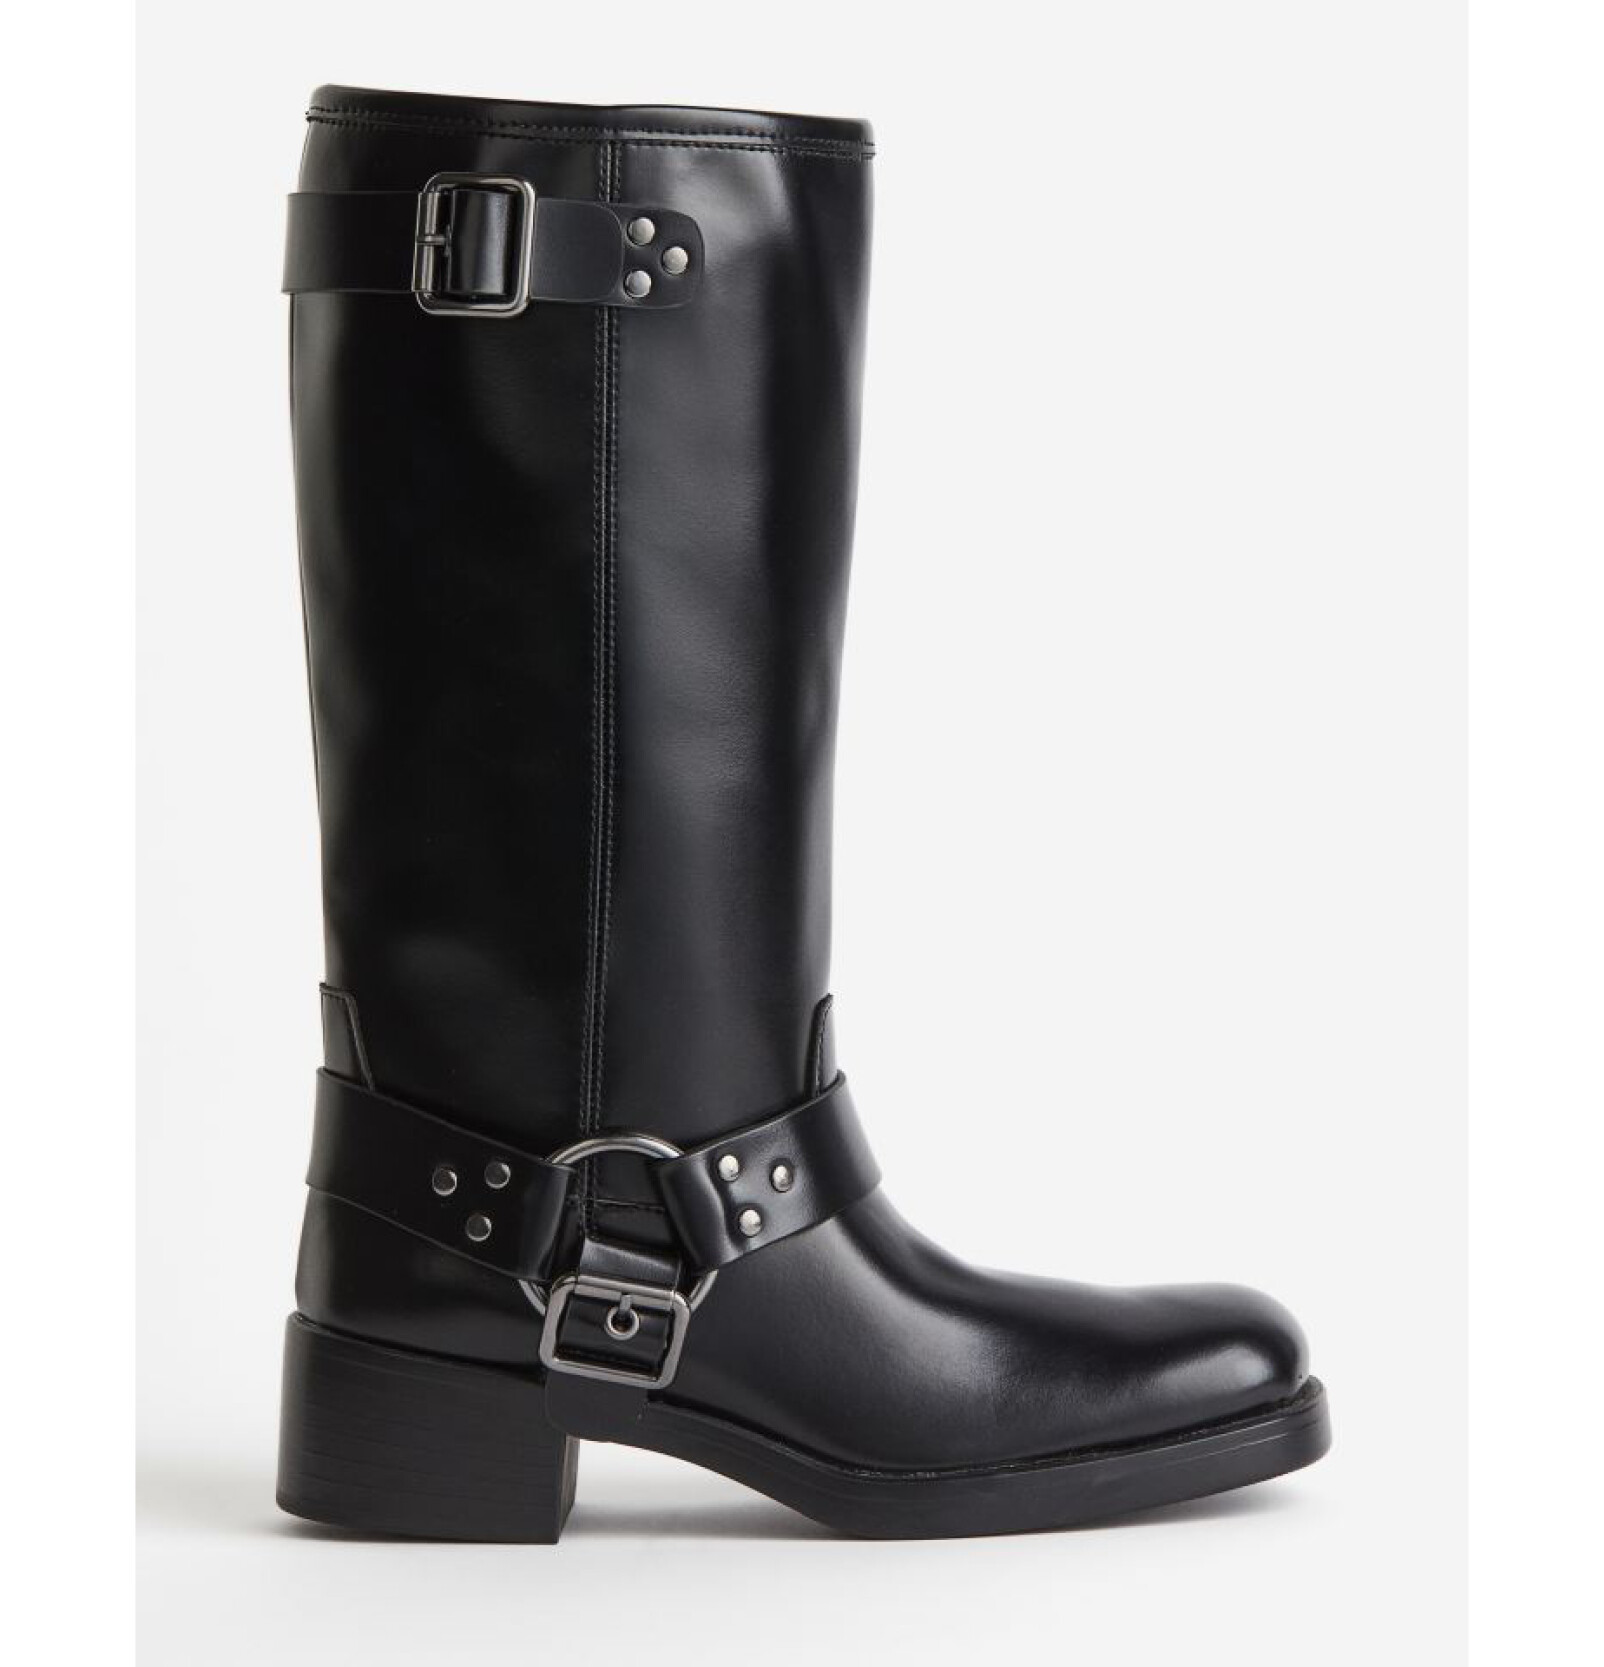 Acne Boots dupe H&M